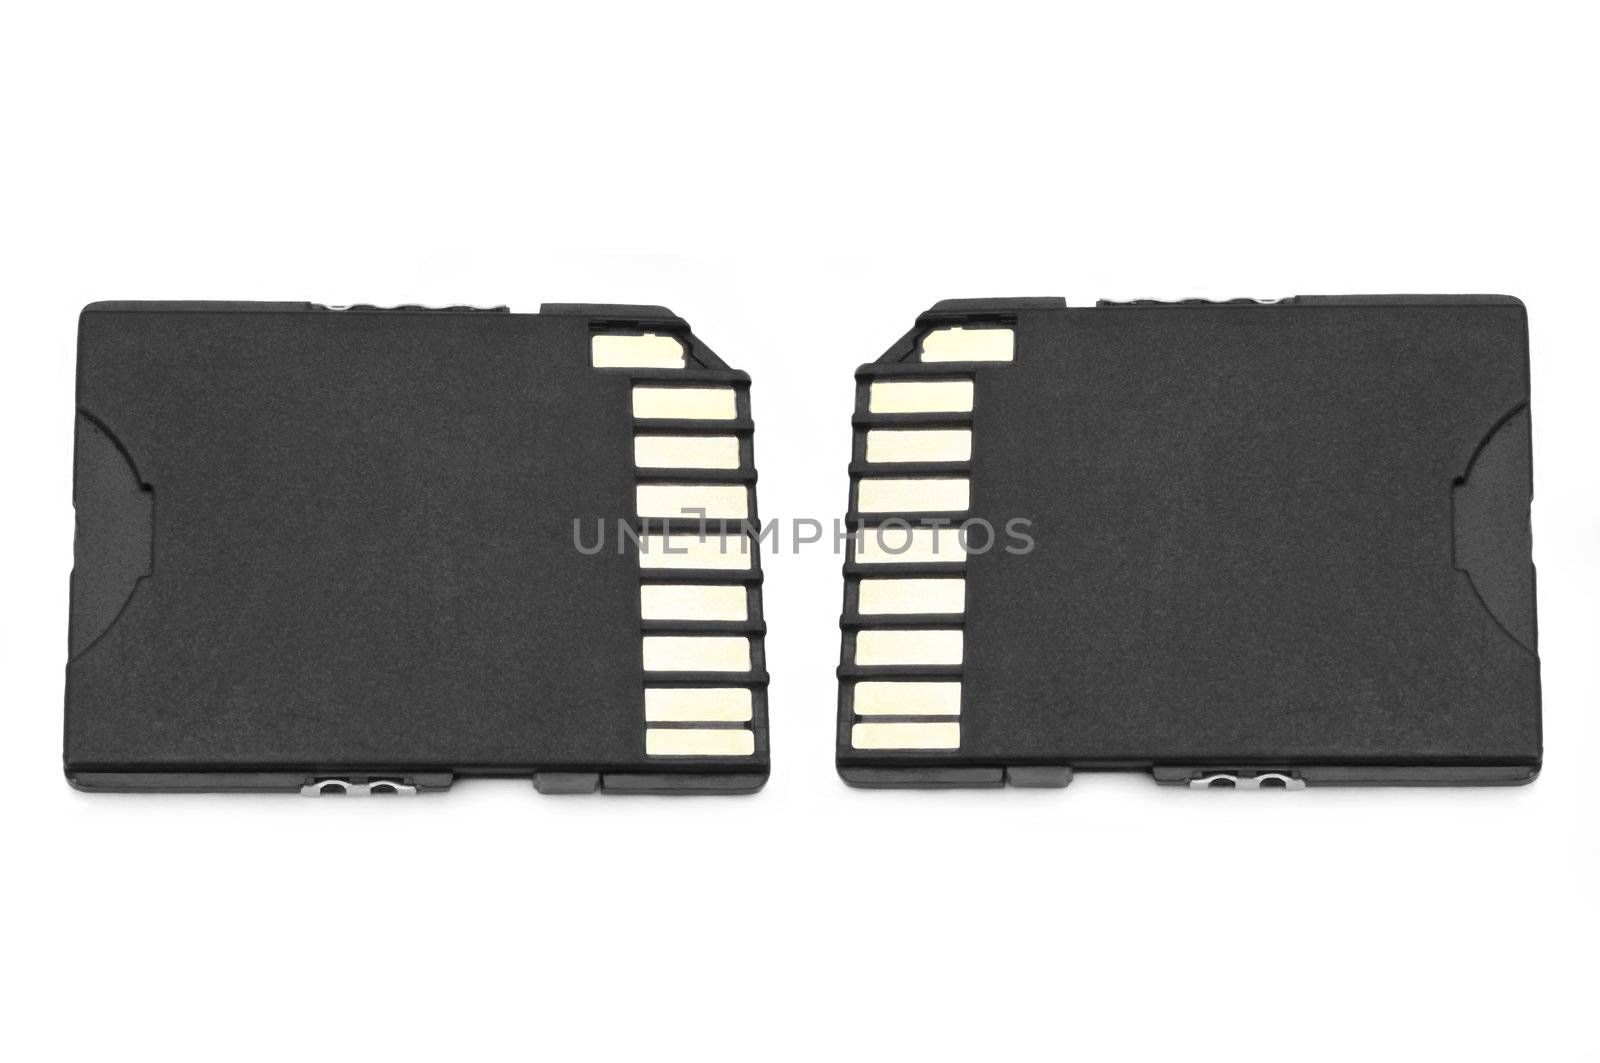 Close up on two black SD memory cards arranged over white